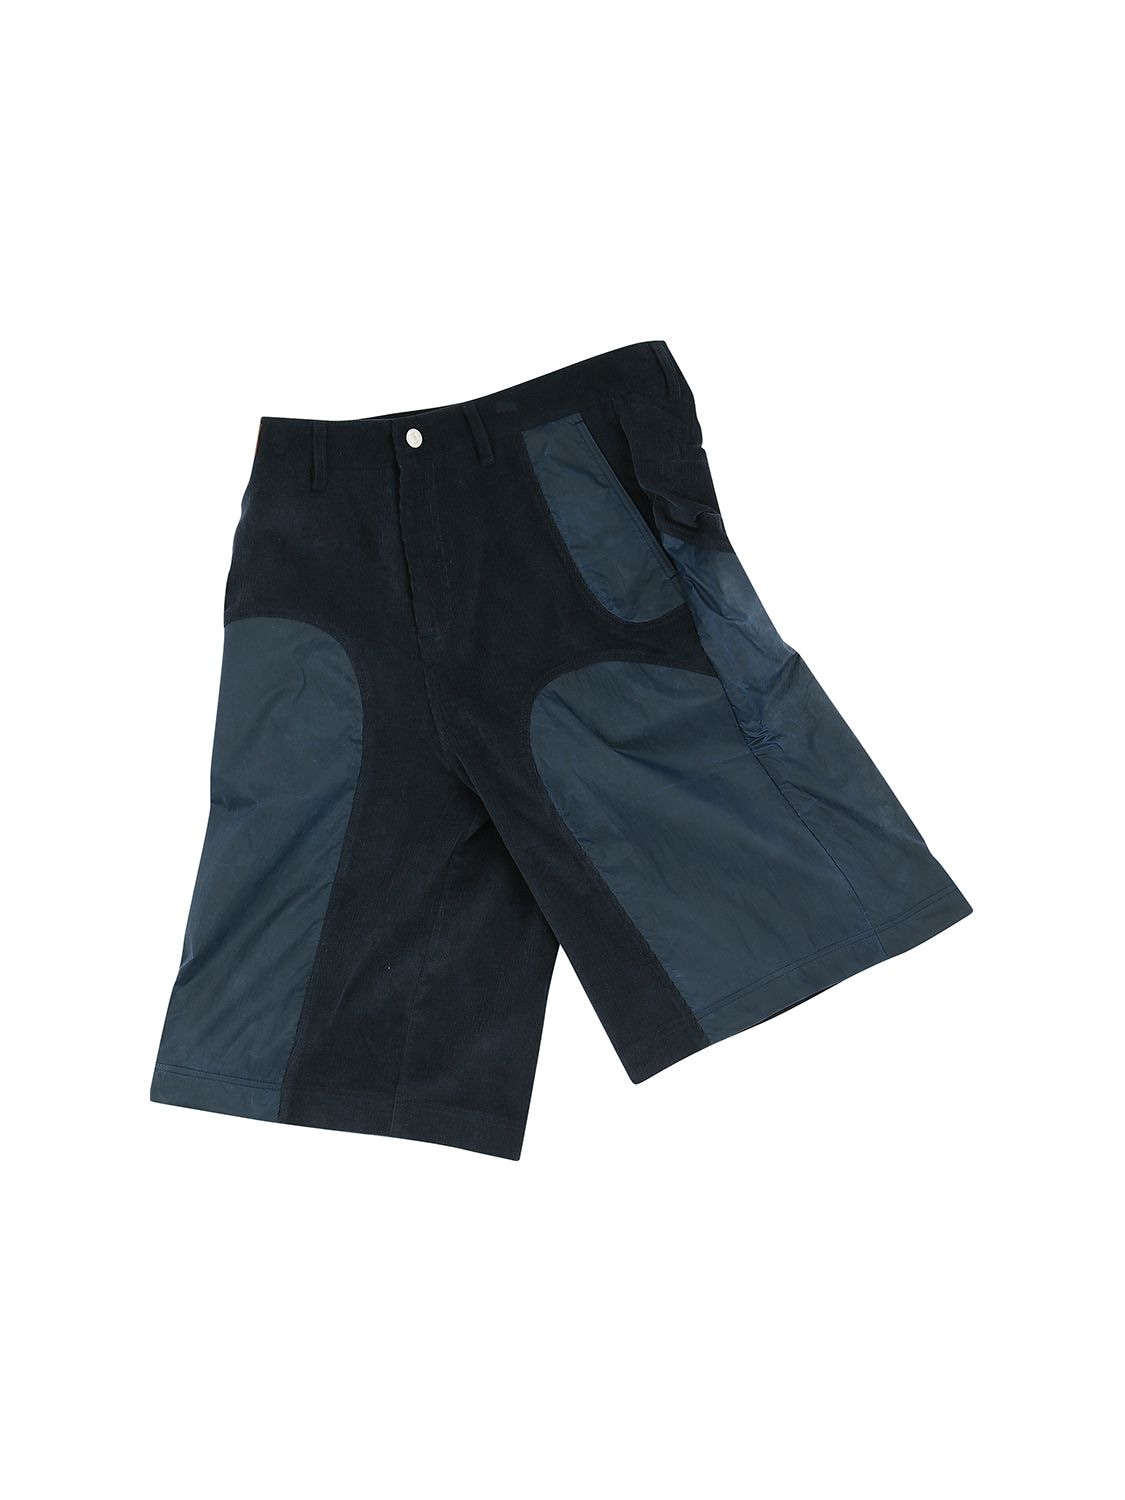 ANDERSSON BELL COTTON CORDUROY & NYLON SHORTS